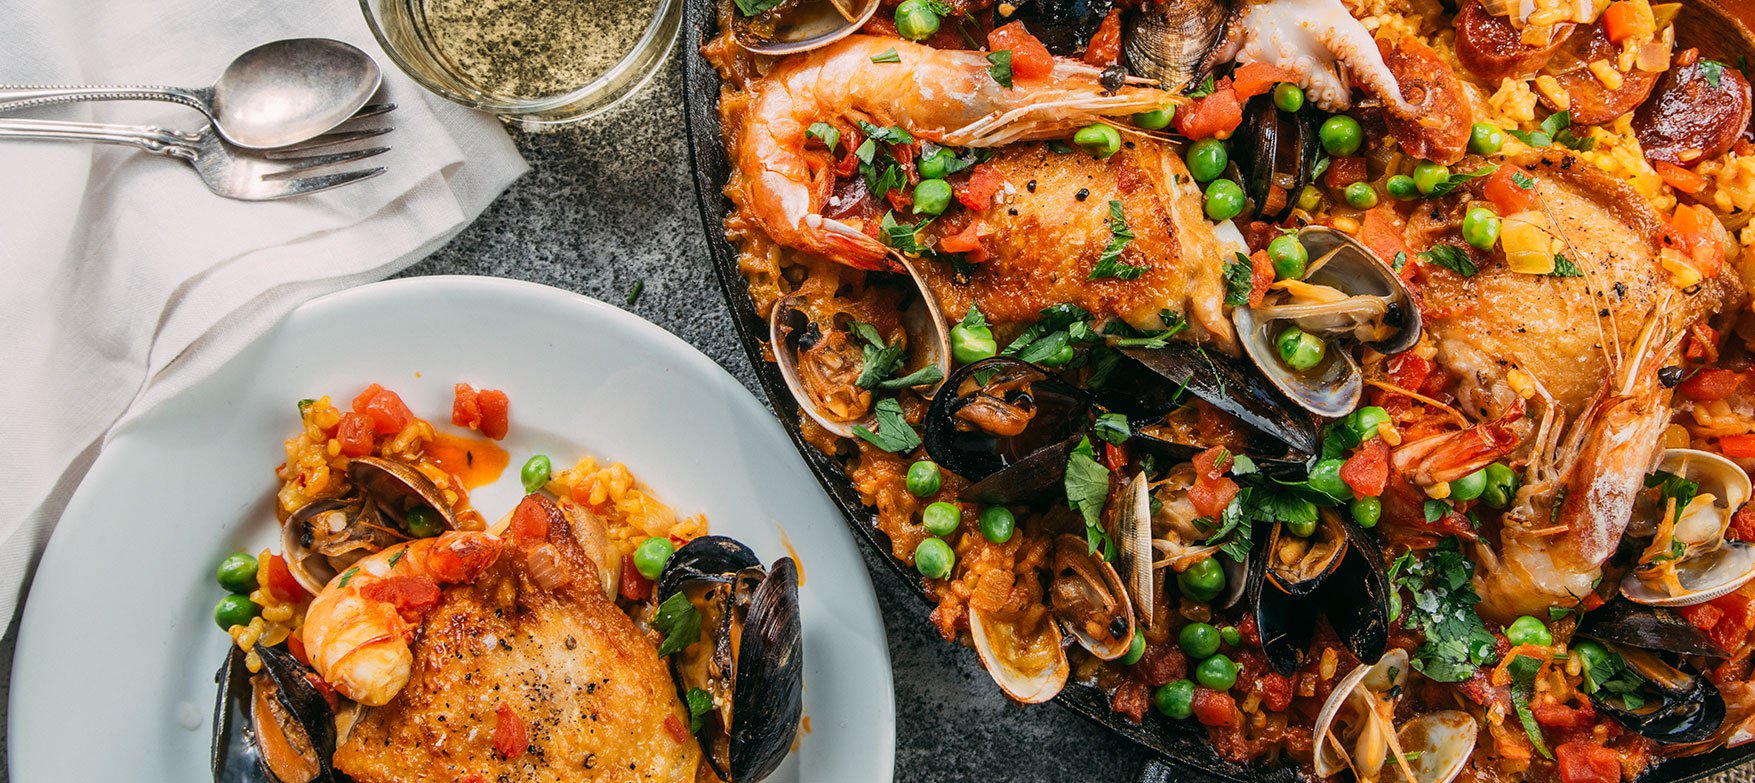 Image of Tuttorosso Tomatoes Paella recipe in a paella pan with a plated serving of rice, chicken and seafood